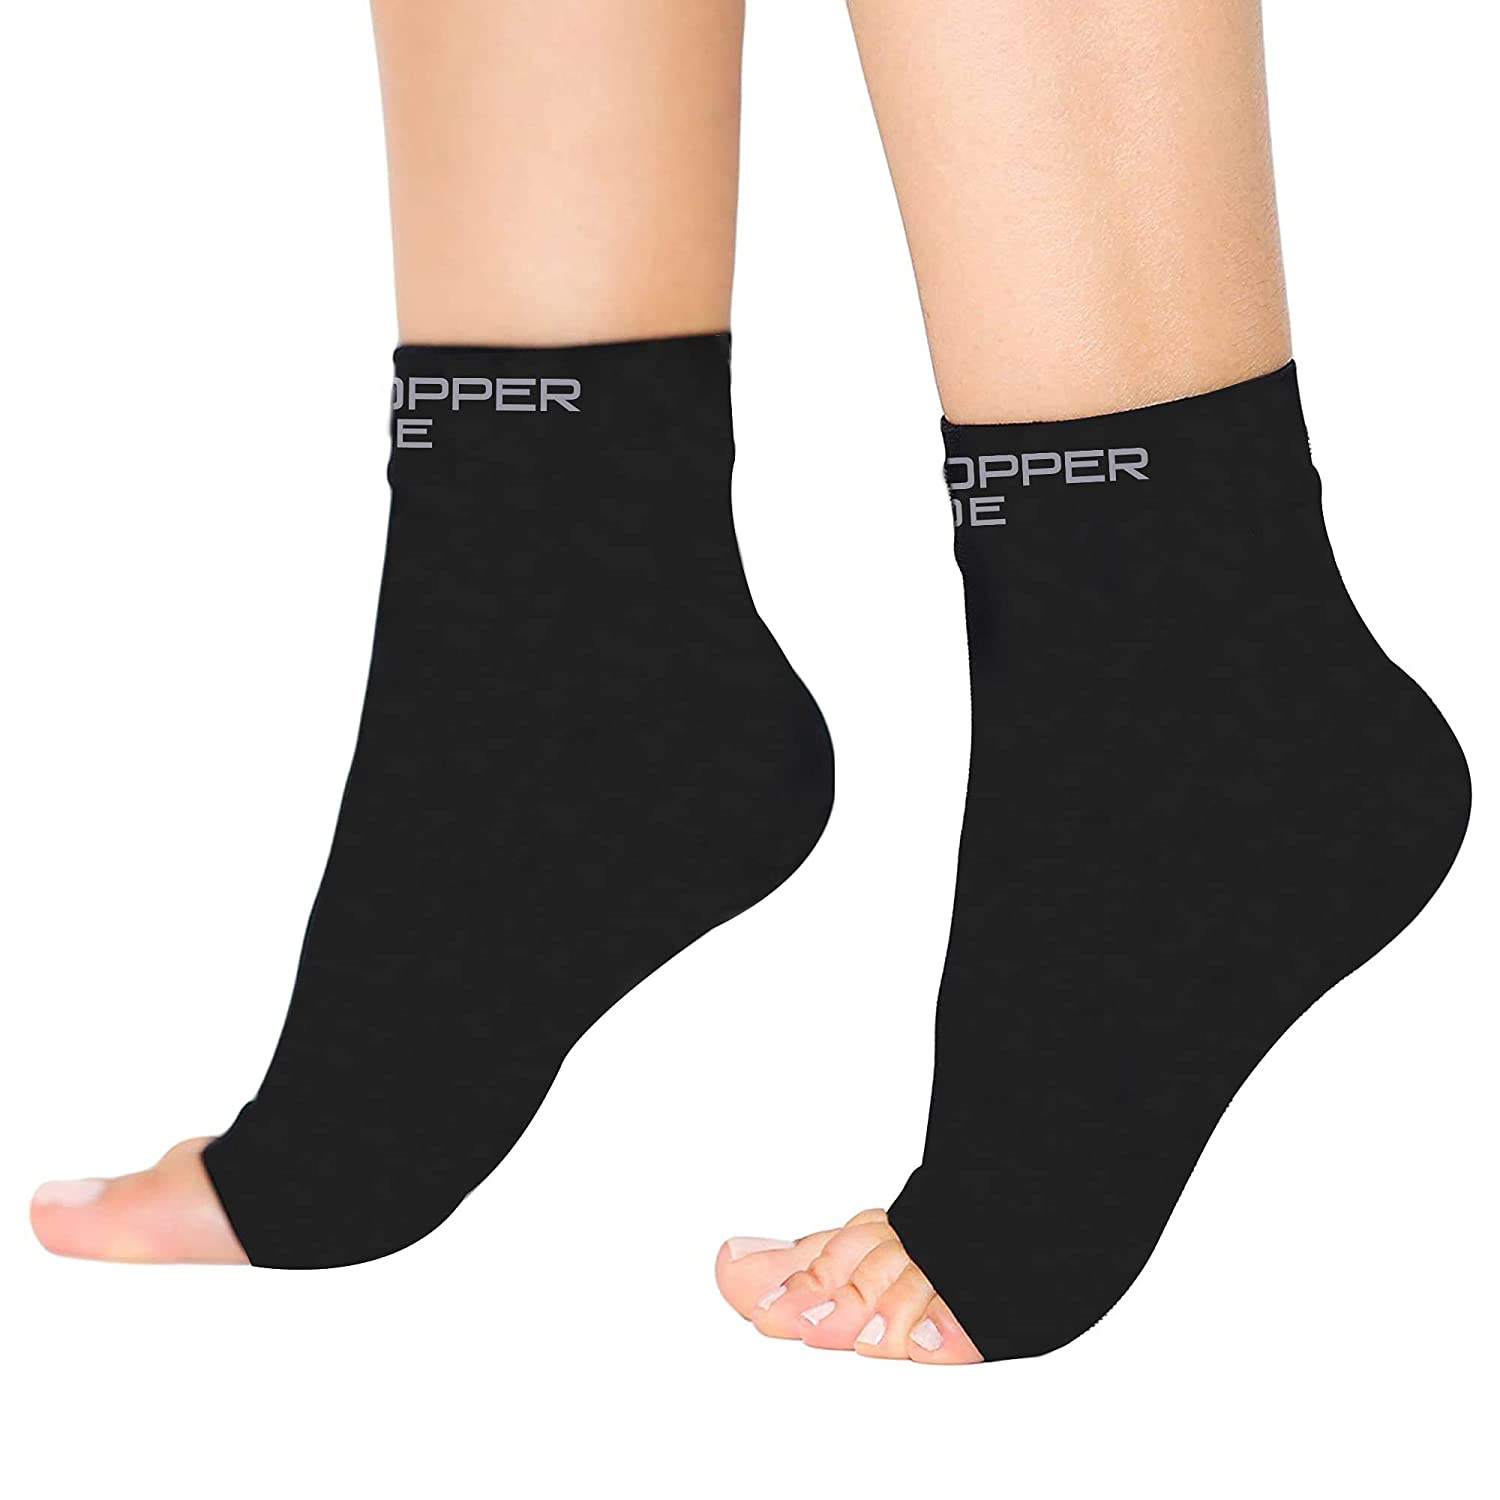 1 Pair Copper Infused Compression Socks Ankle Support Pain Relief Socks  Foot Anti-Fatigue Compression Sports Running Yoga Socks